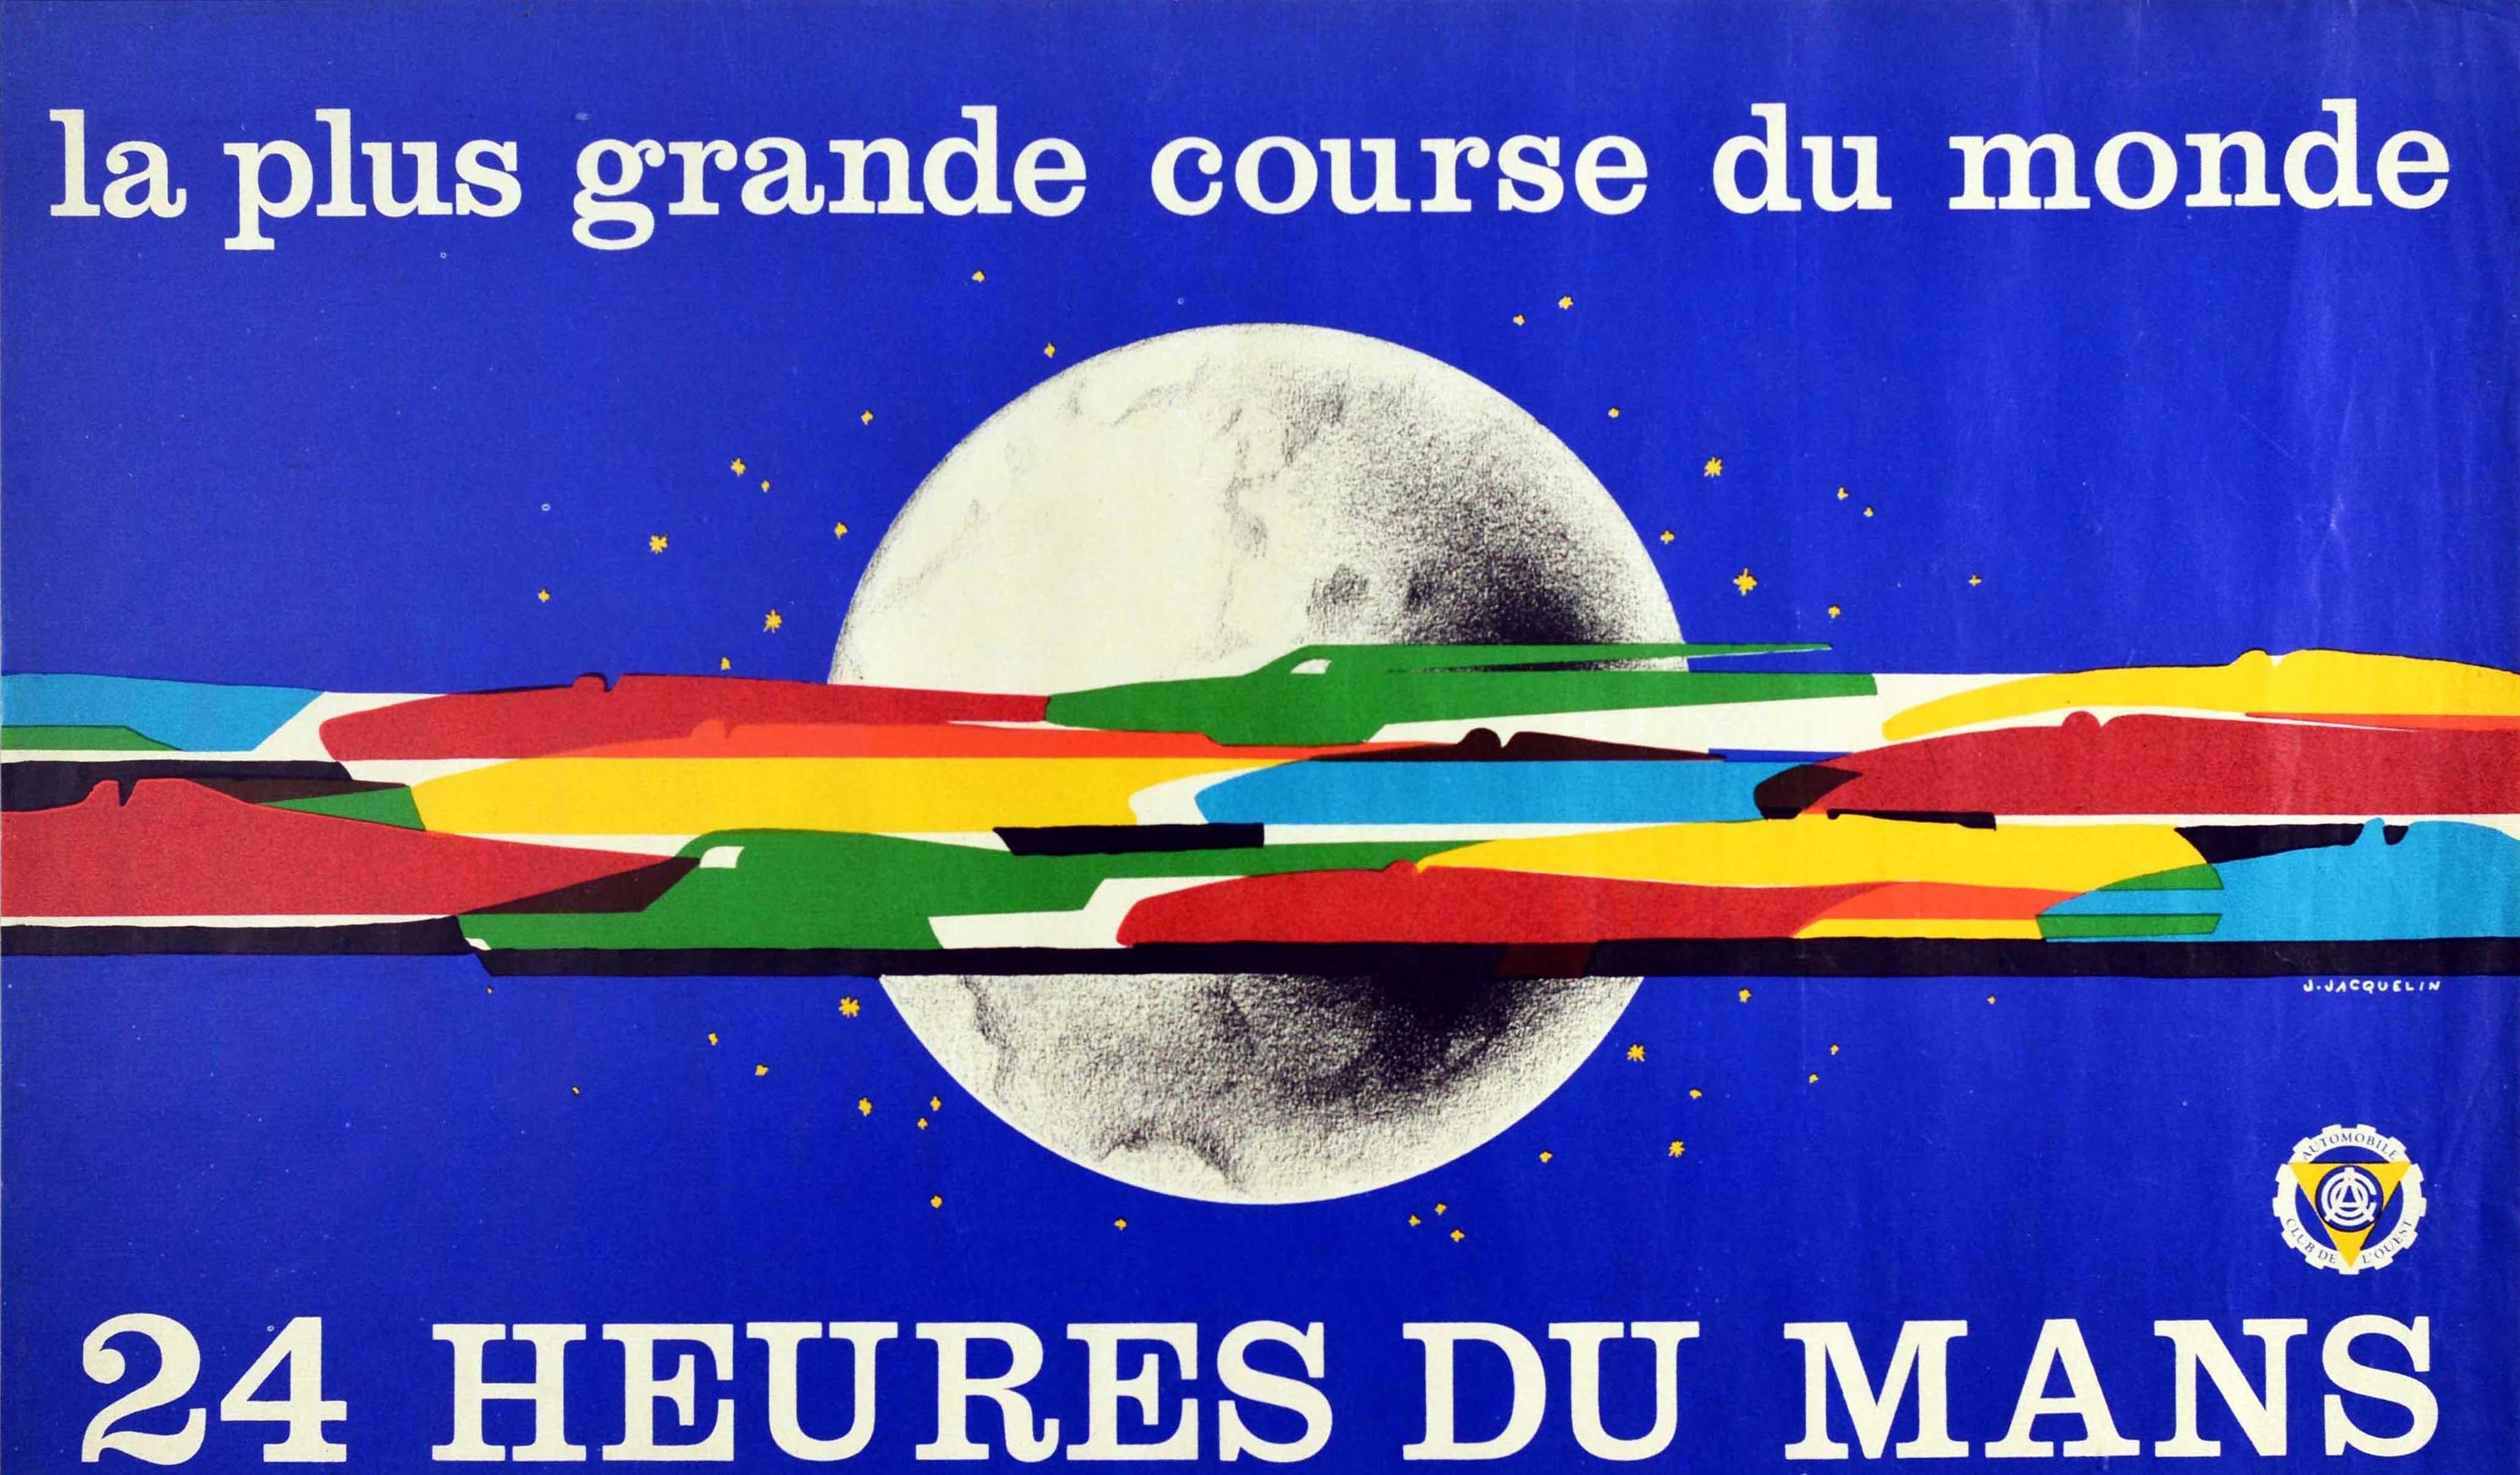 Original vintage Le Mans motor sport poster for the 24 Heures du Mans 15-16 June 1974 featuring a dynamic design by Jean Jacquelin (1905-1989) depicting colourful depictions of cars racing at speed in a blur in front of the world on a blue starry